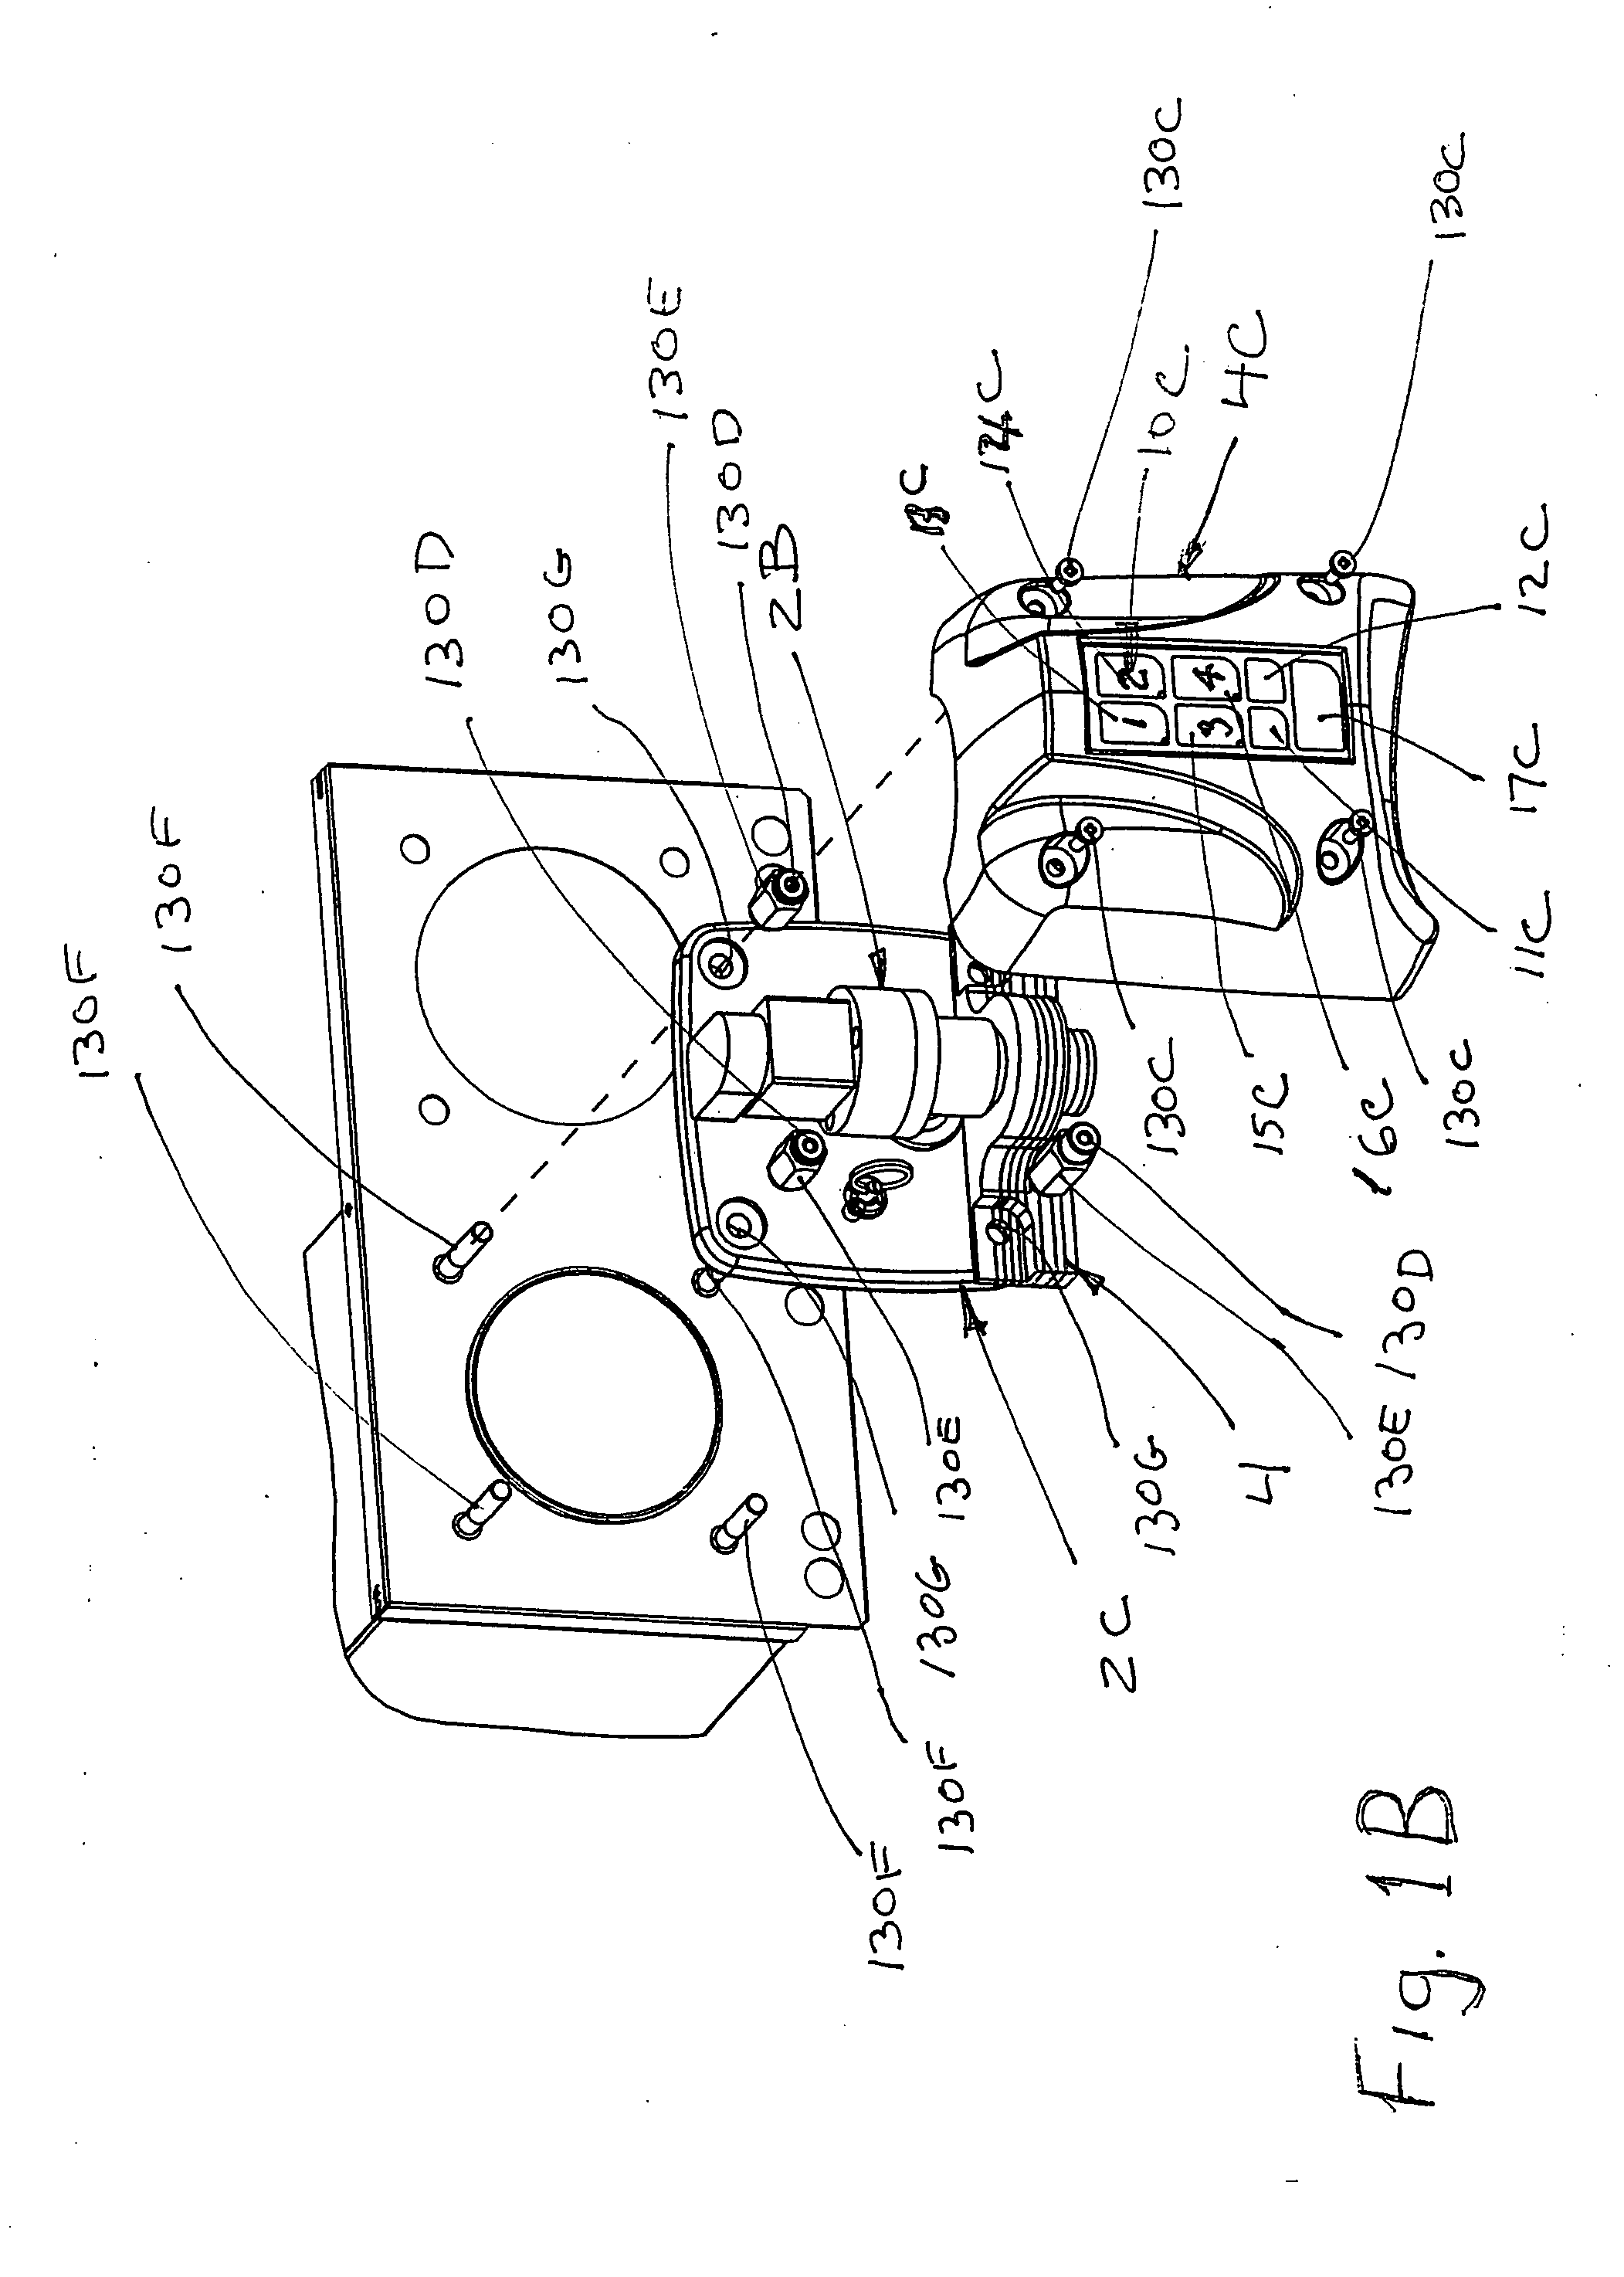 Frozen carbonated modulating dispensing valve and/or flavor injection